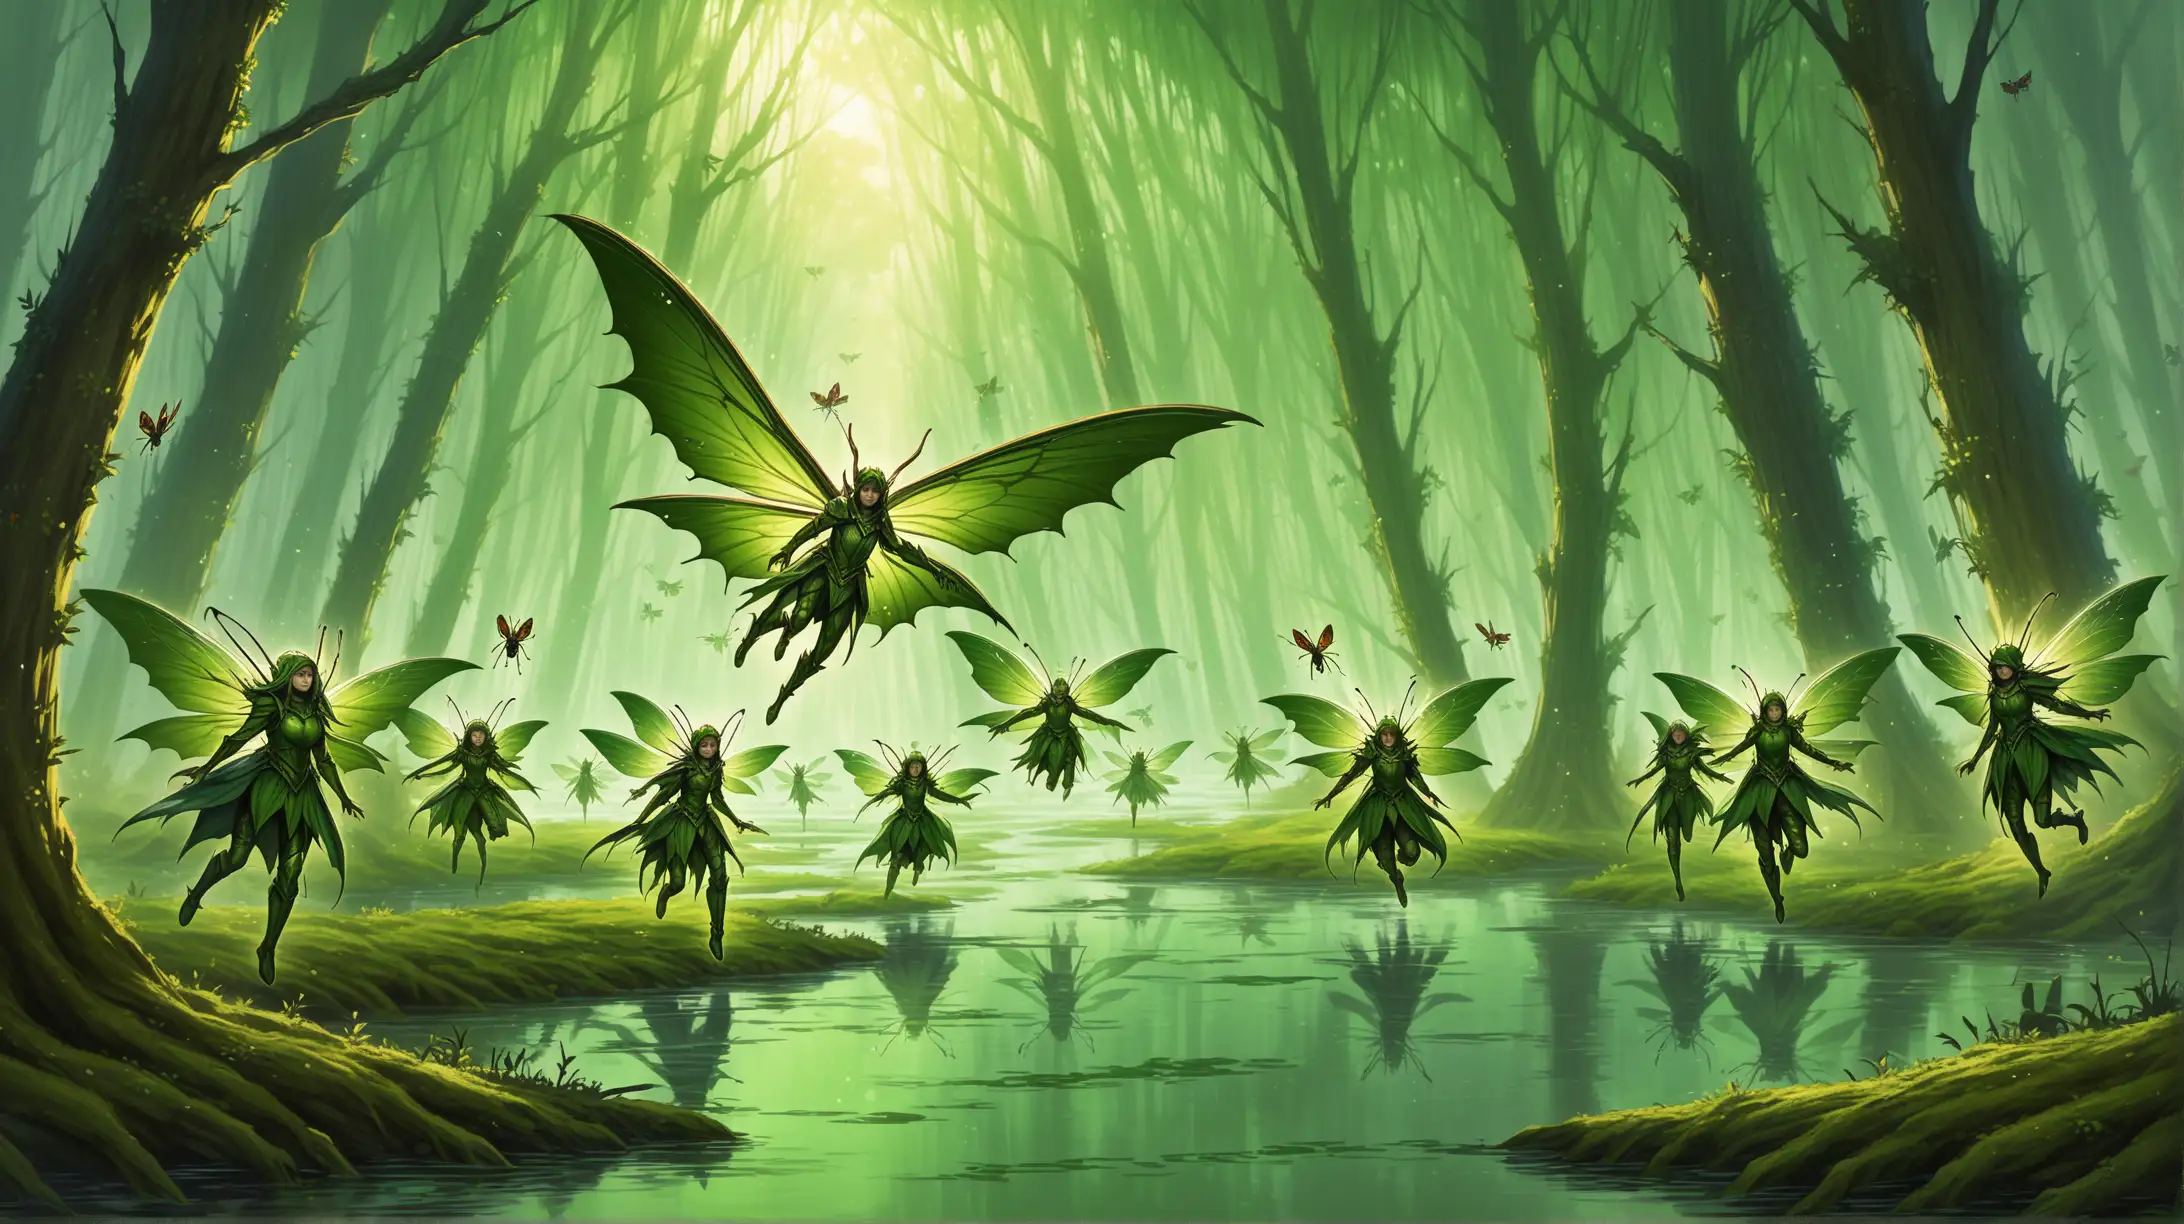 Medieval Fantasy Scene Winged Elf Fairies in Insect Armor Soar Above Cursed Swamp